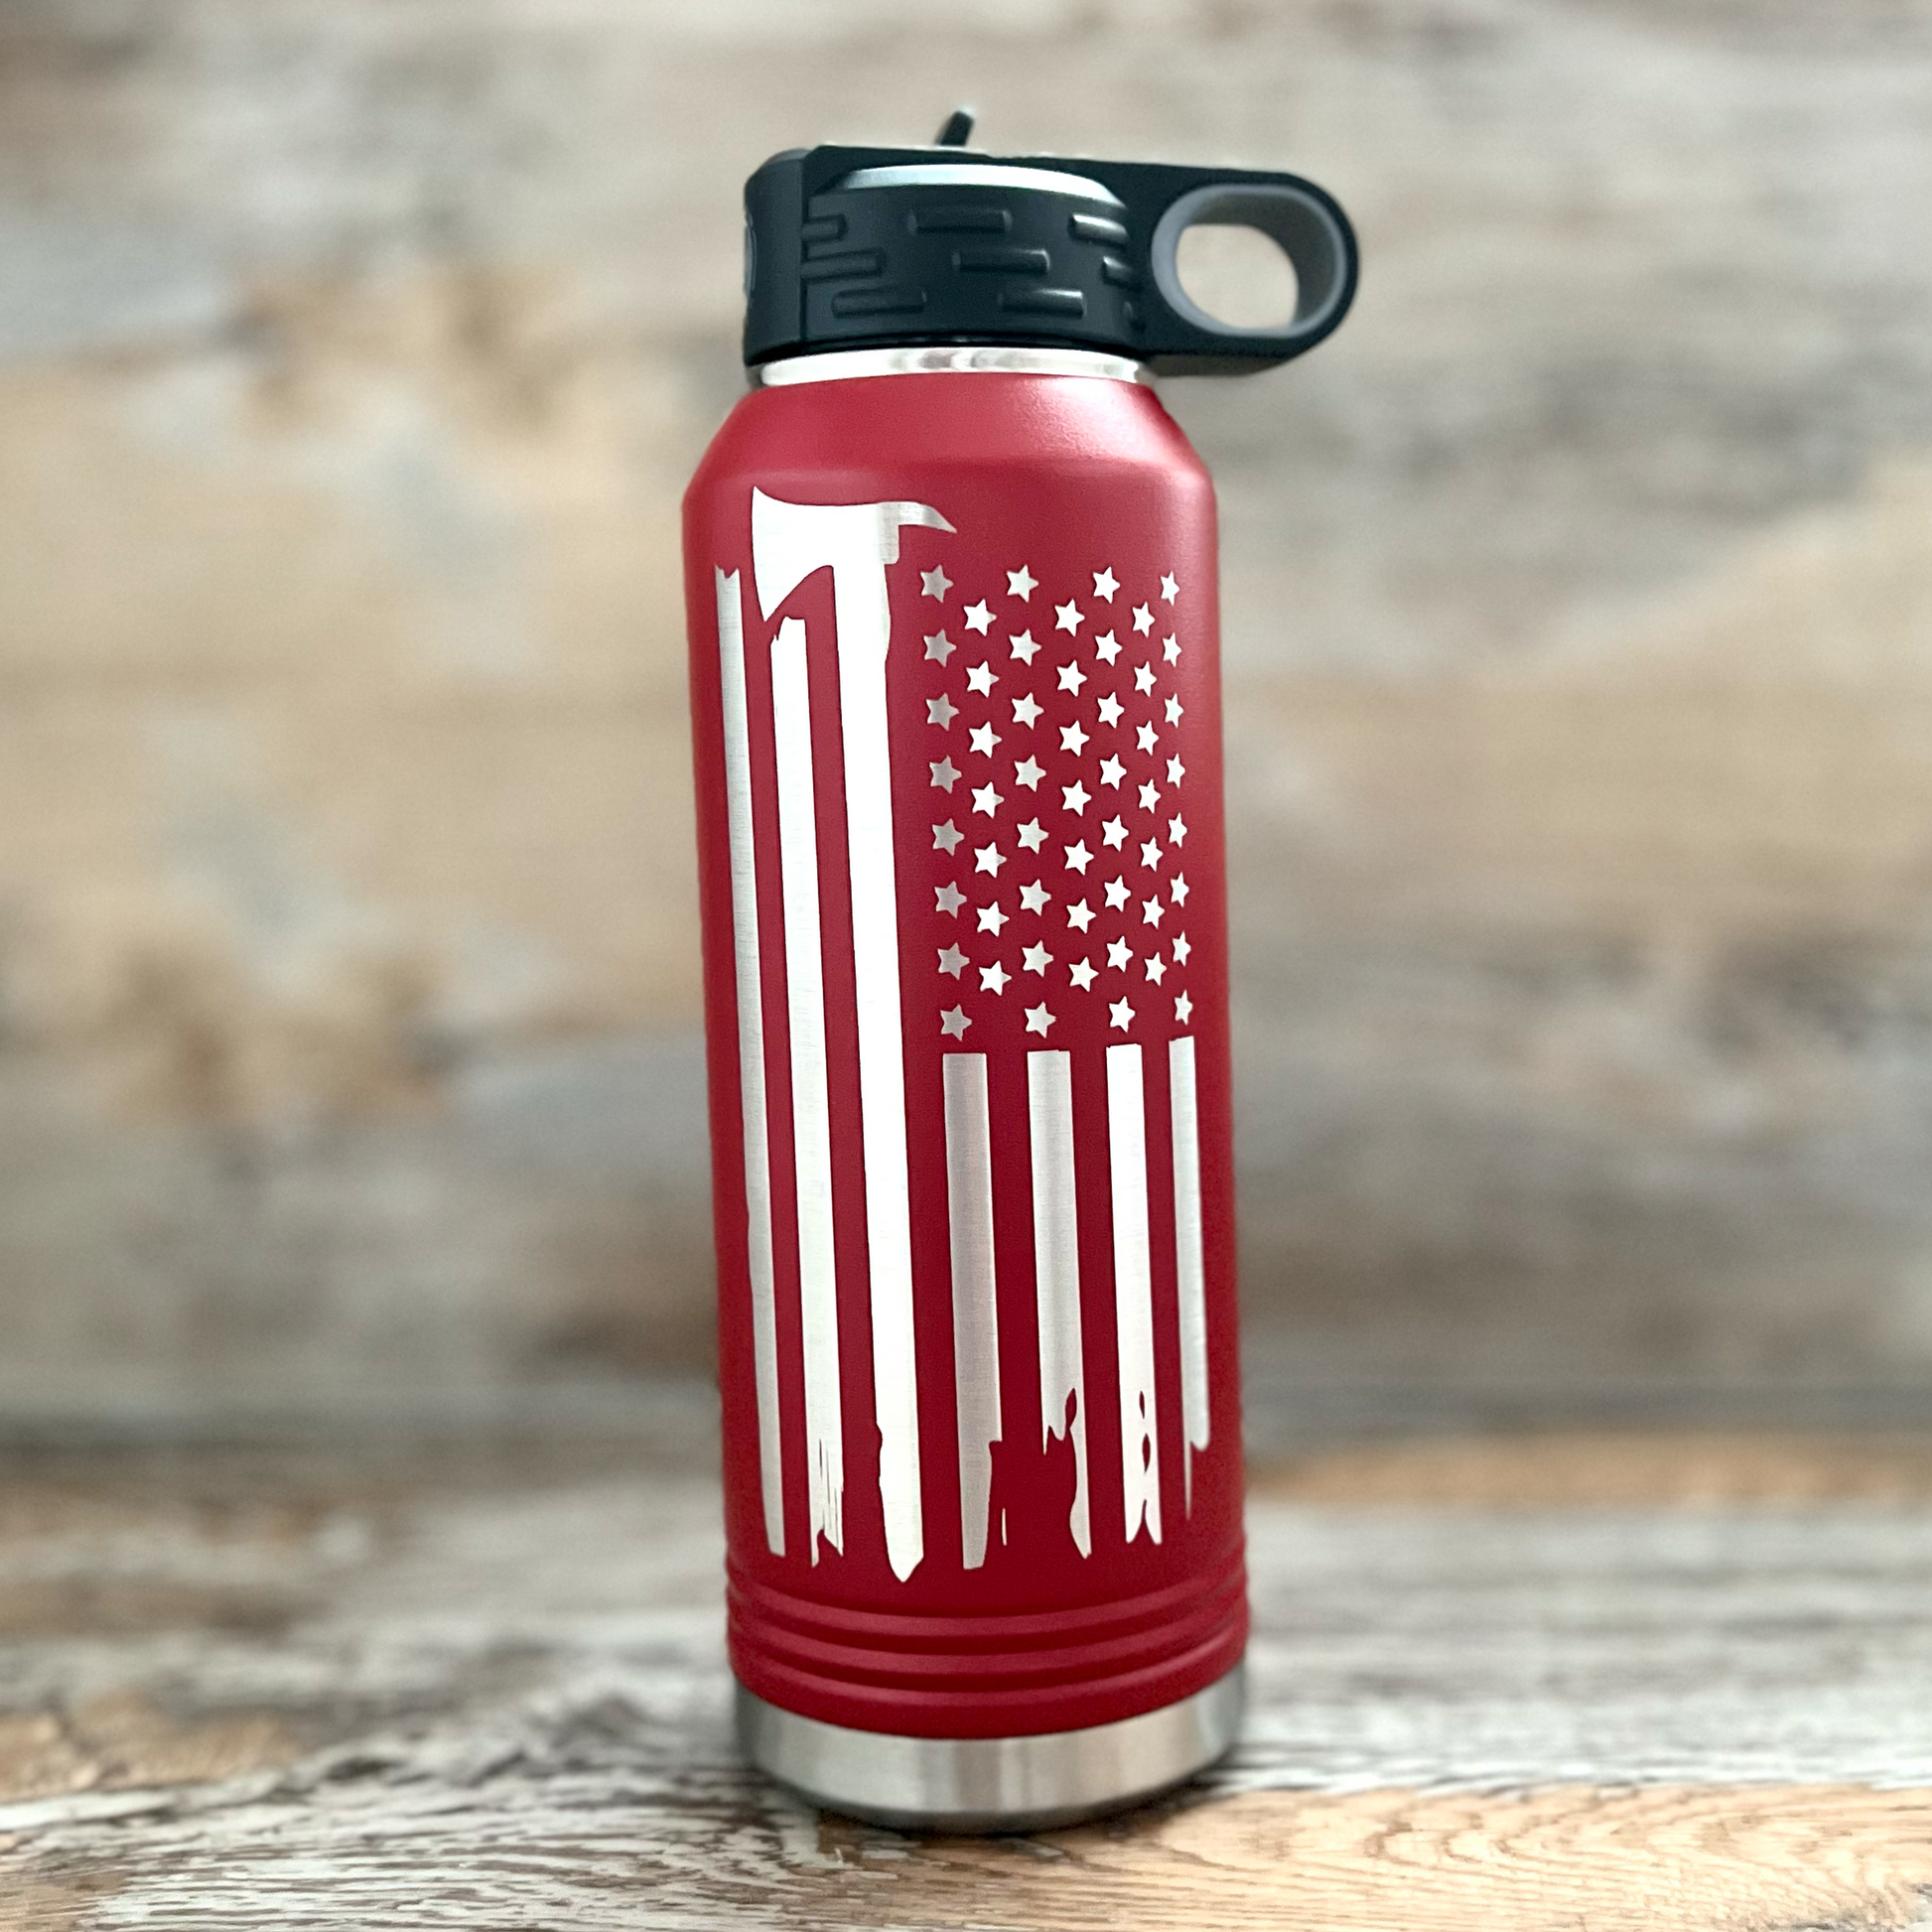 32 ounce firemens flag insulated water bottle - River Barn Designs